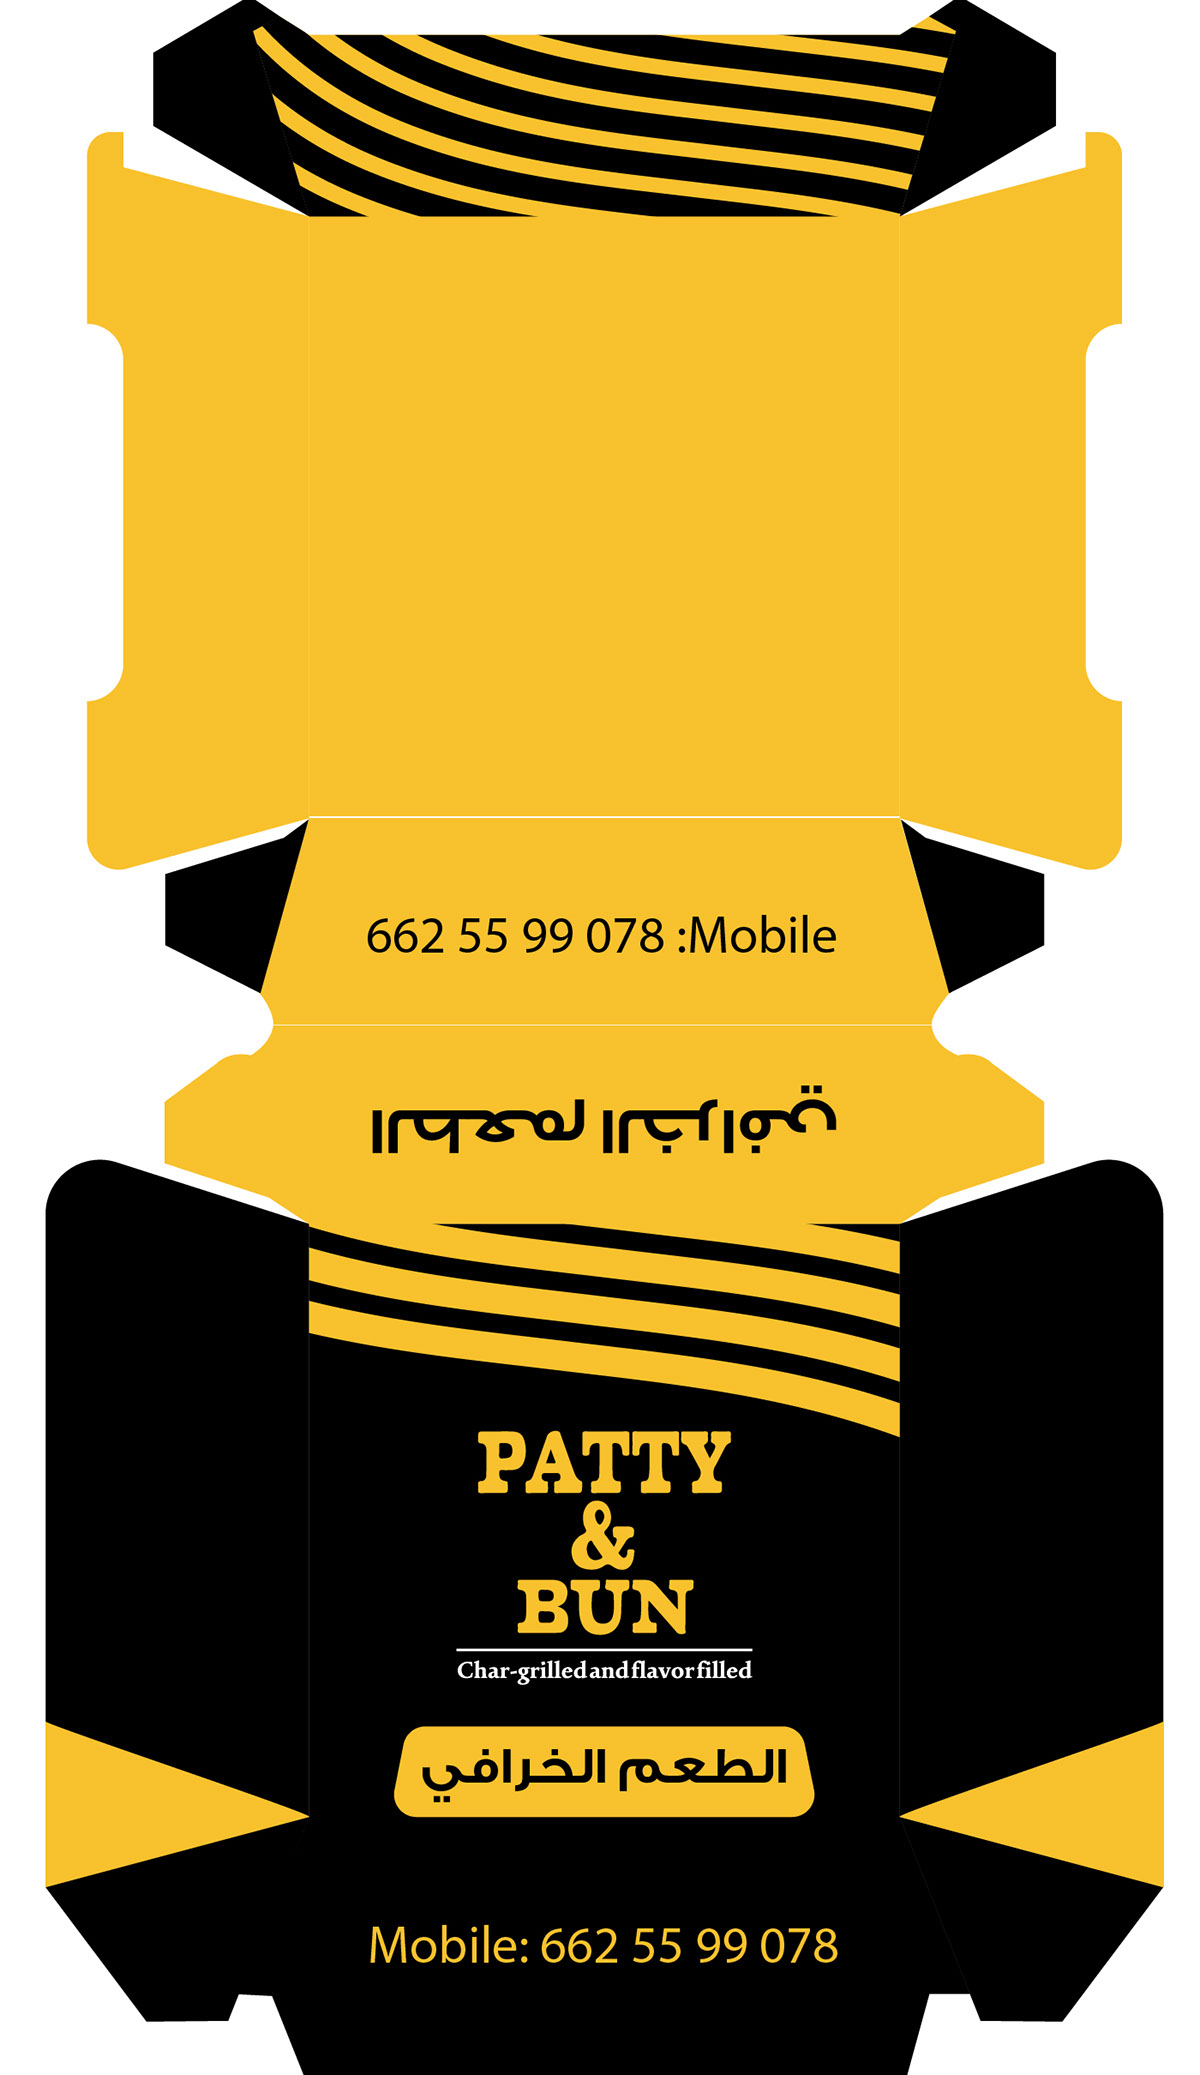 PATTY and BUN rendition image